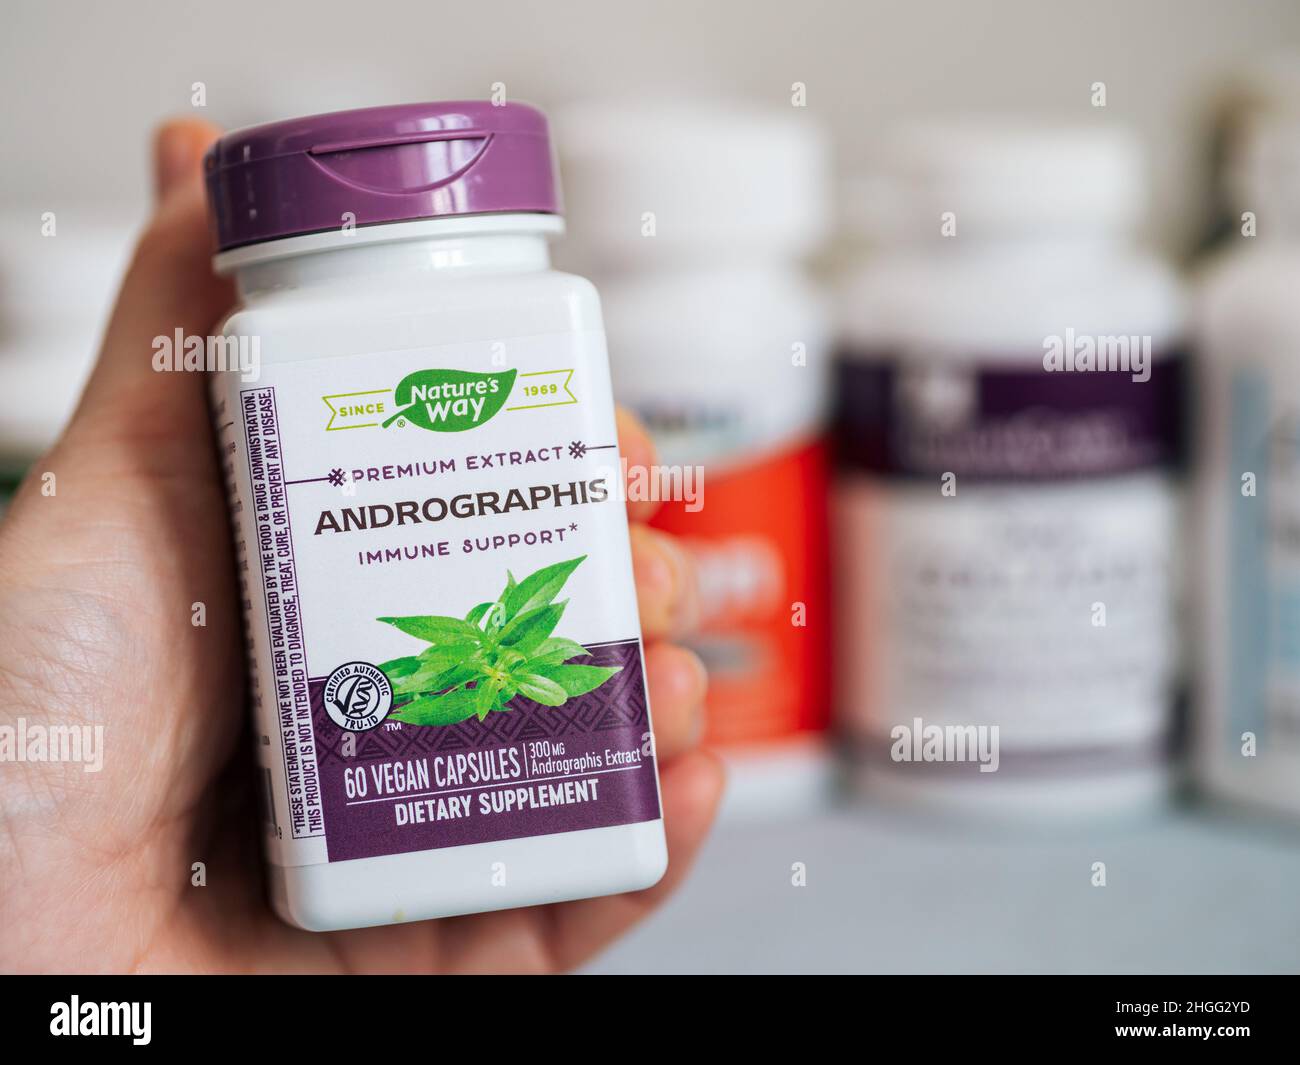 Moscow, Russia - March 09, 2021: Jar with Andrographis capsules in female hand and others nutrition supplements in blurred background. White and purple plastic jar Andrographis by Nature's Way for immune support Stock Photo